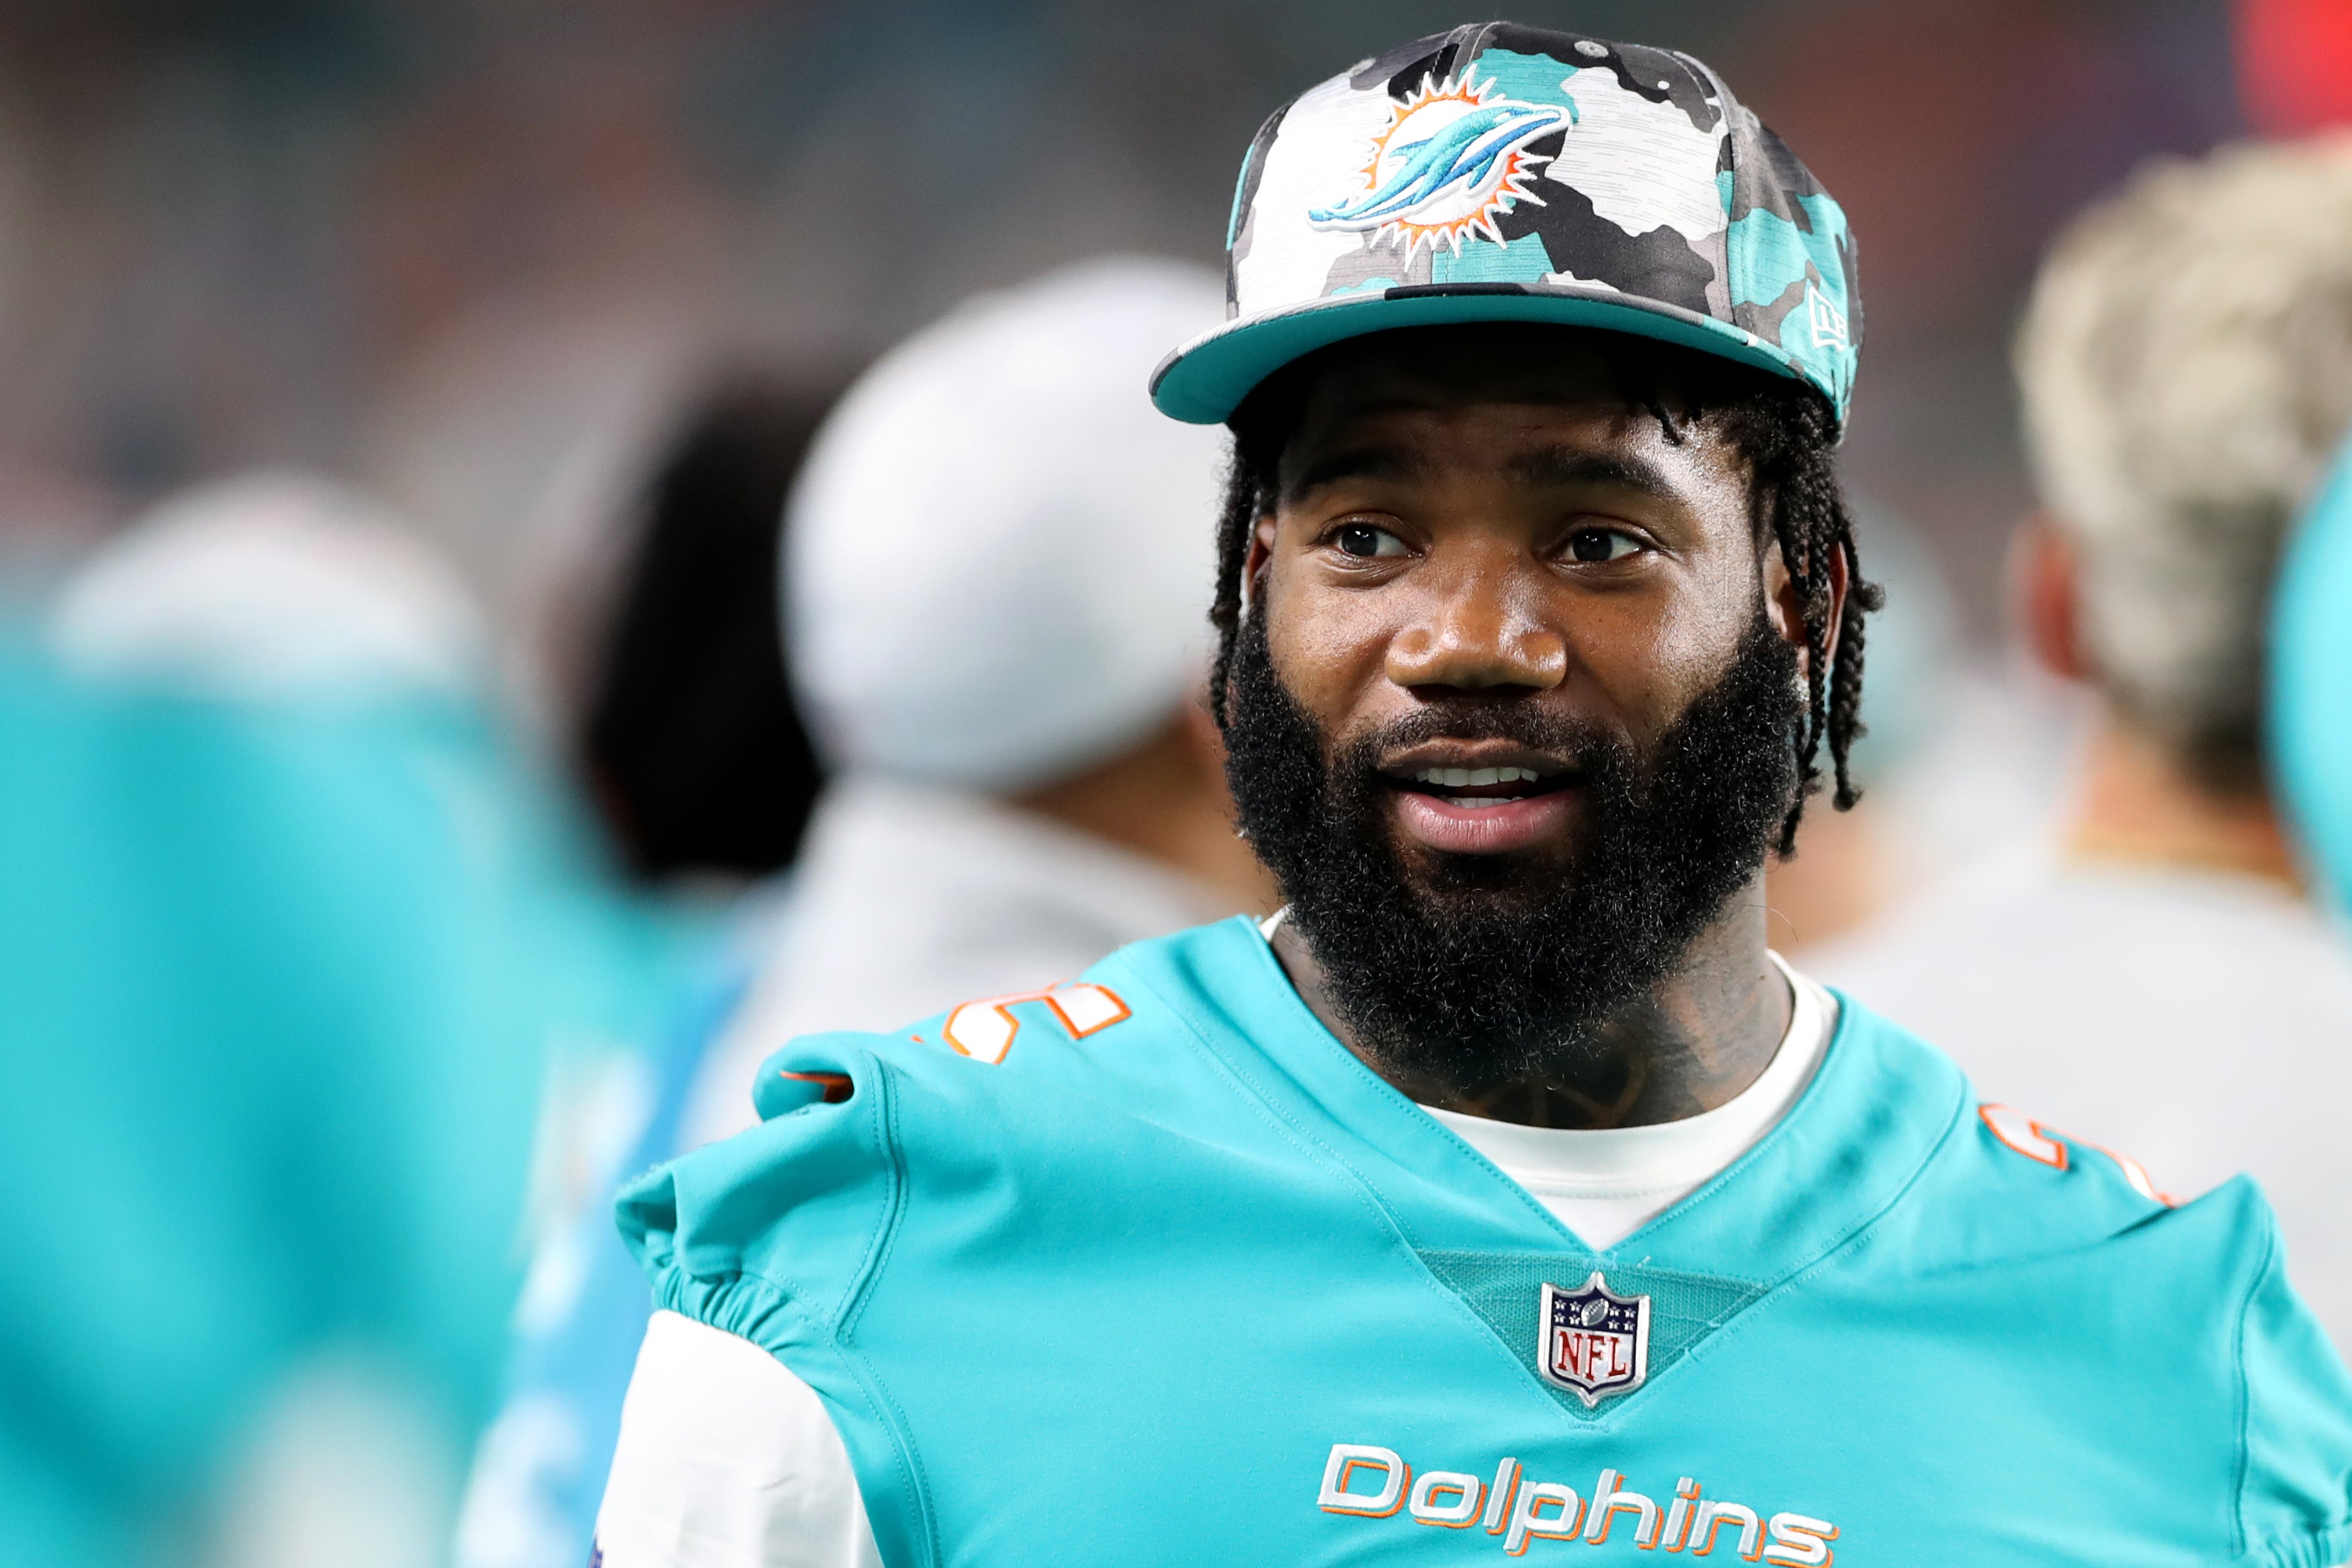 A new lawsuit claims Xavien Howard, pictured while playing for the Miami Dolphins, sent ‘revenge porn’ to a woman’s underage son.